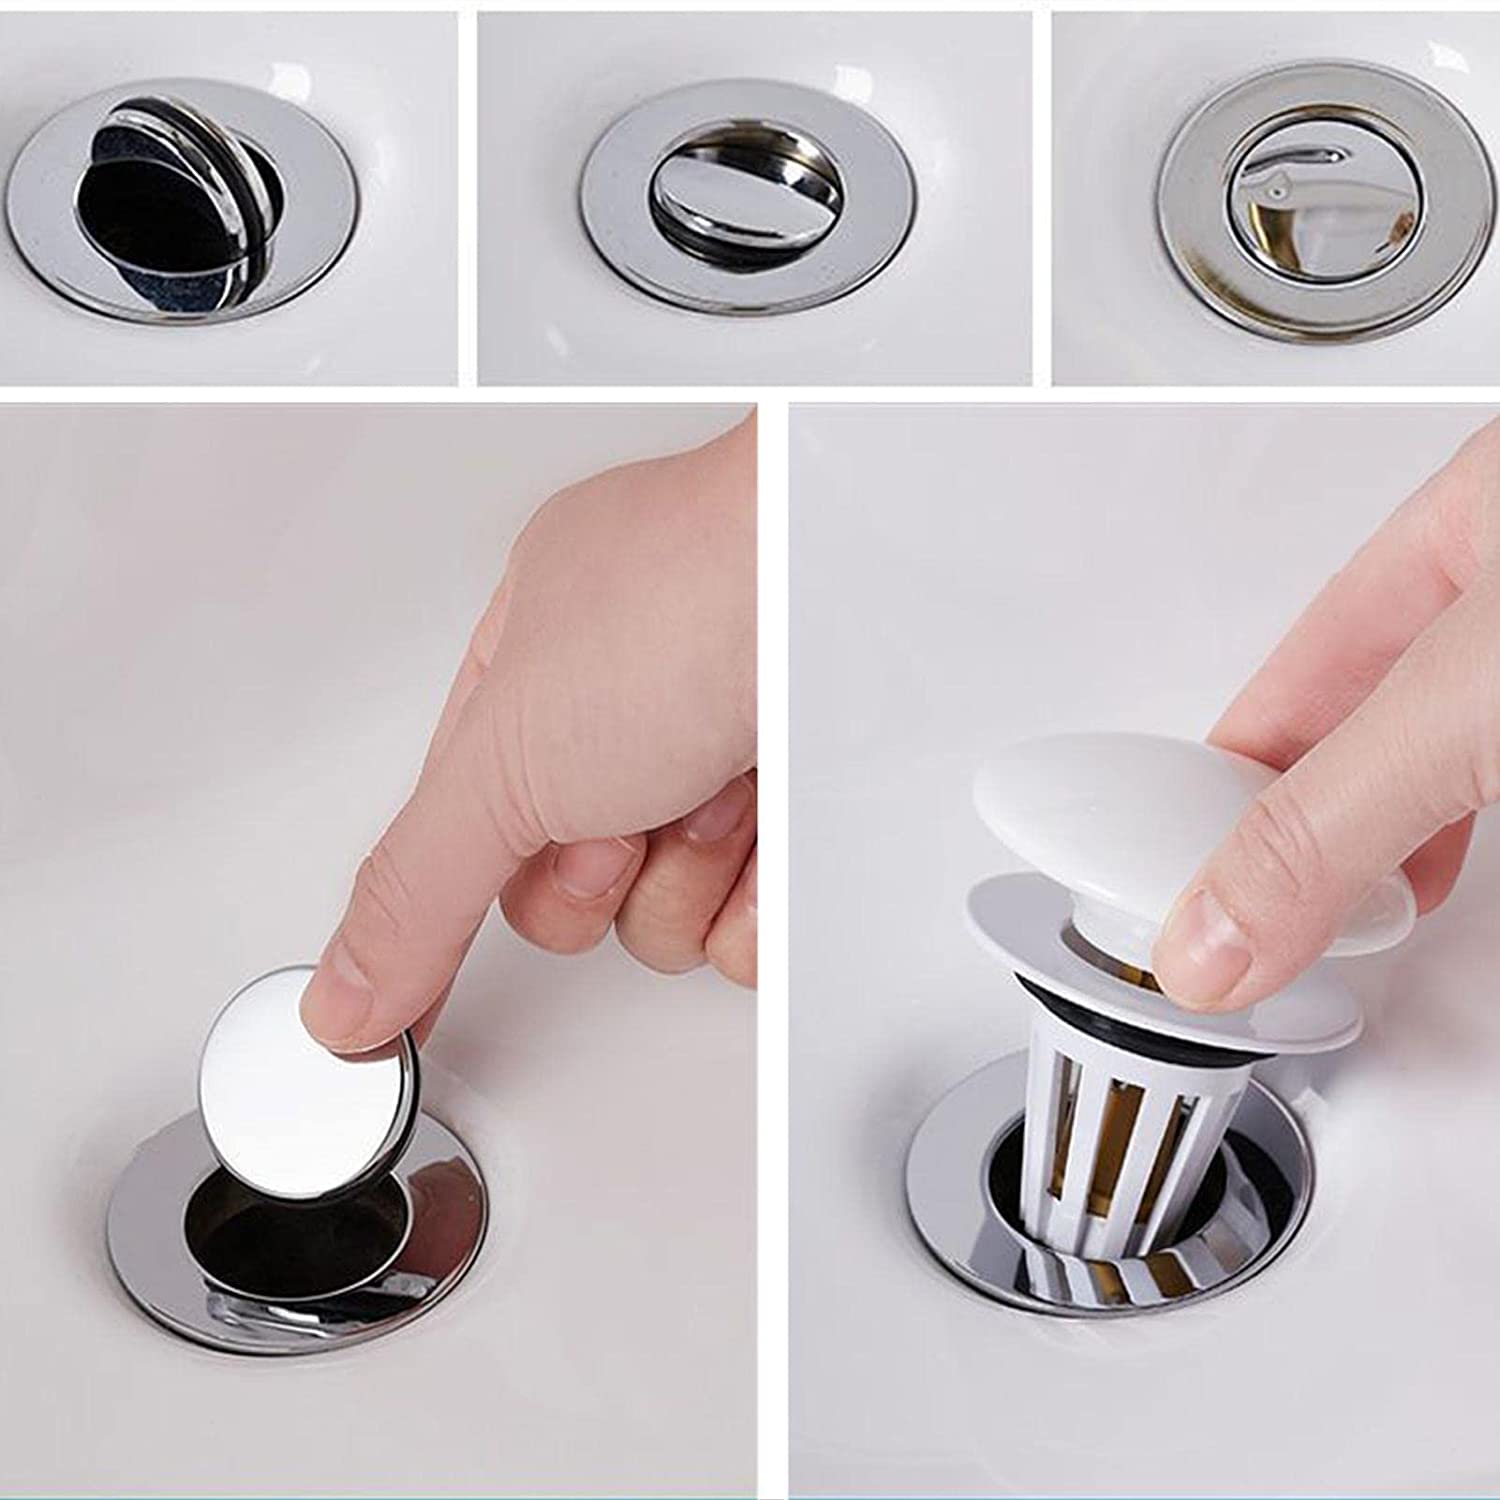 Someone placing the Bathroom Sink Stopper Drain Filter with Hair Catcher into the sink